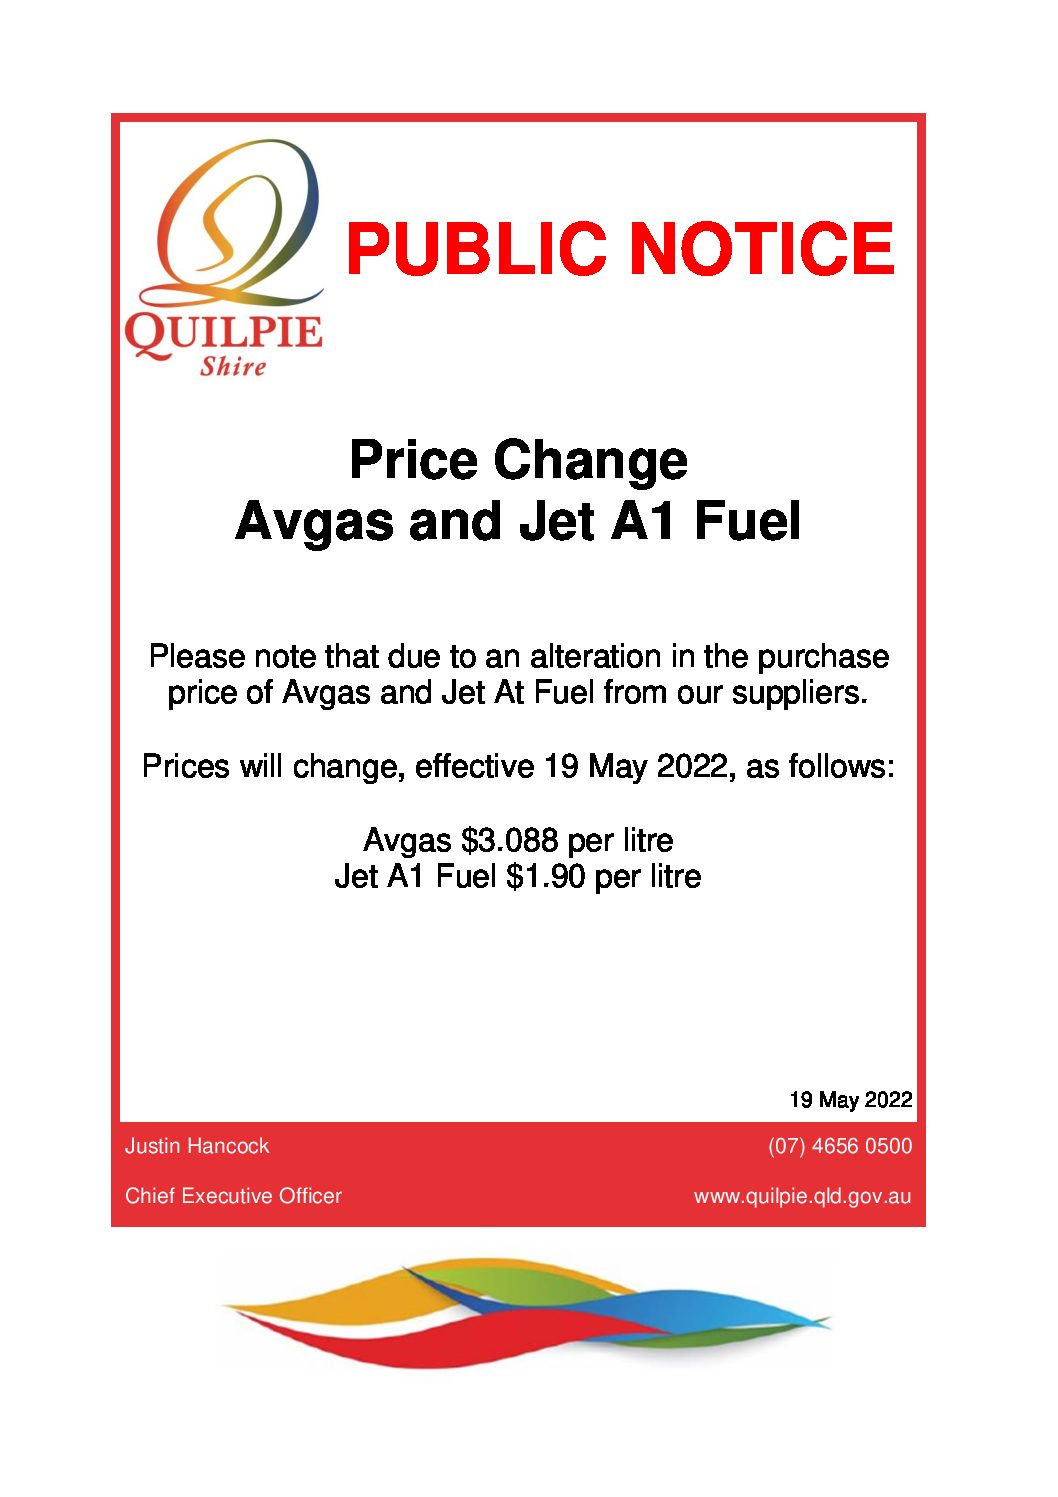 Avgas and Jet A1 Fuel price change